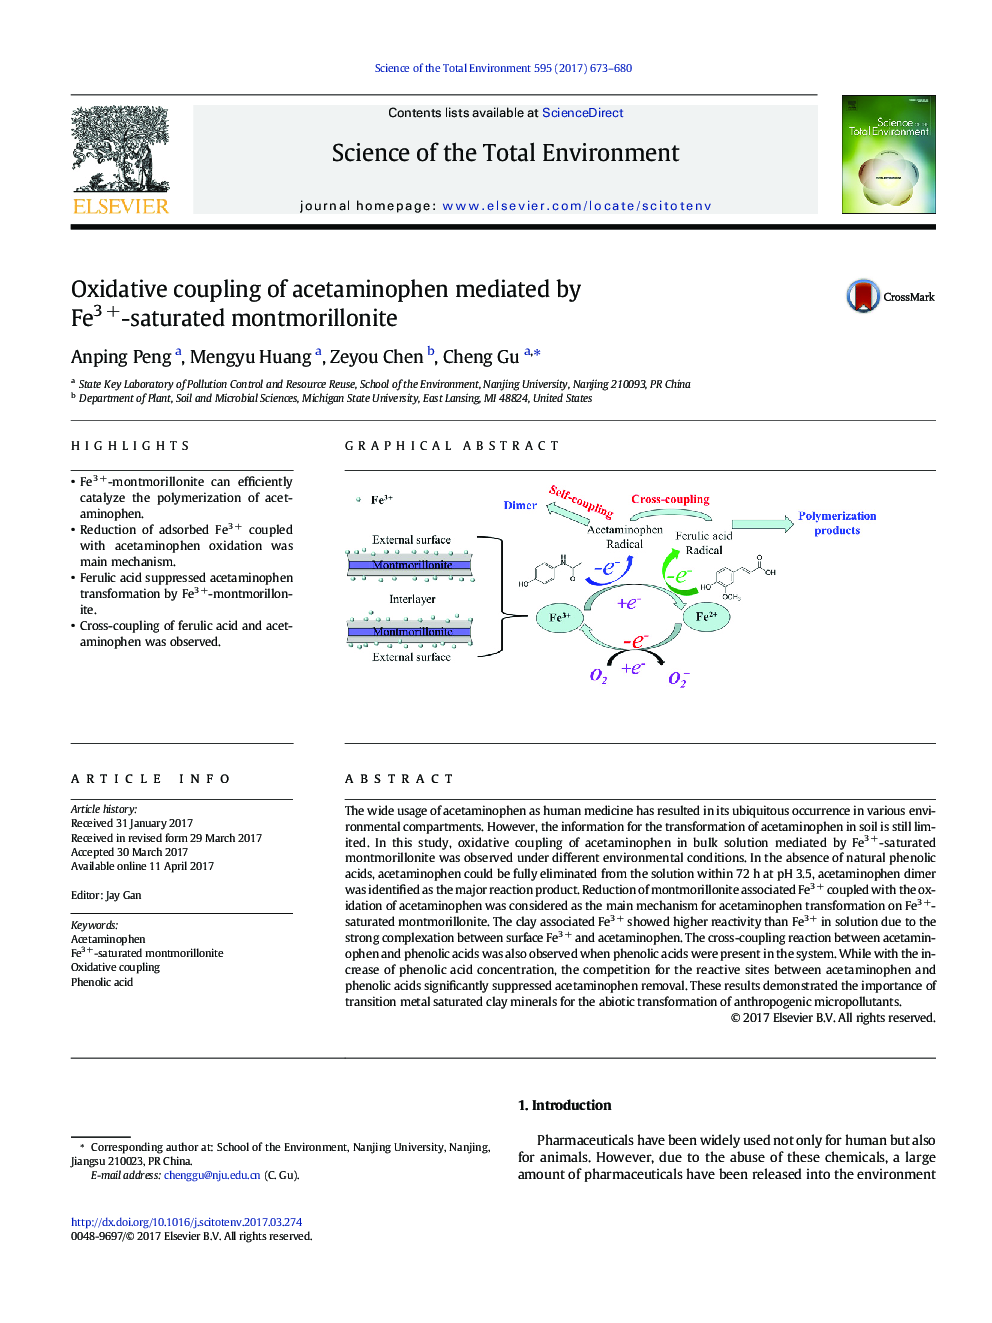 Oxidative coupling of acetaminophen mediated by Fe3Â +-saturated montmorillonite